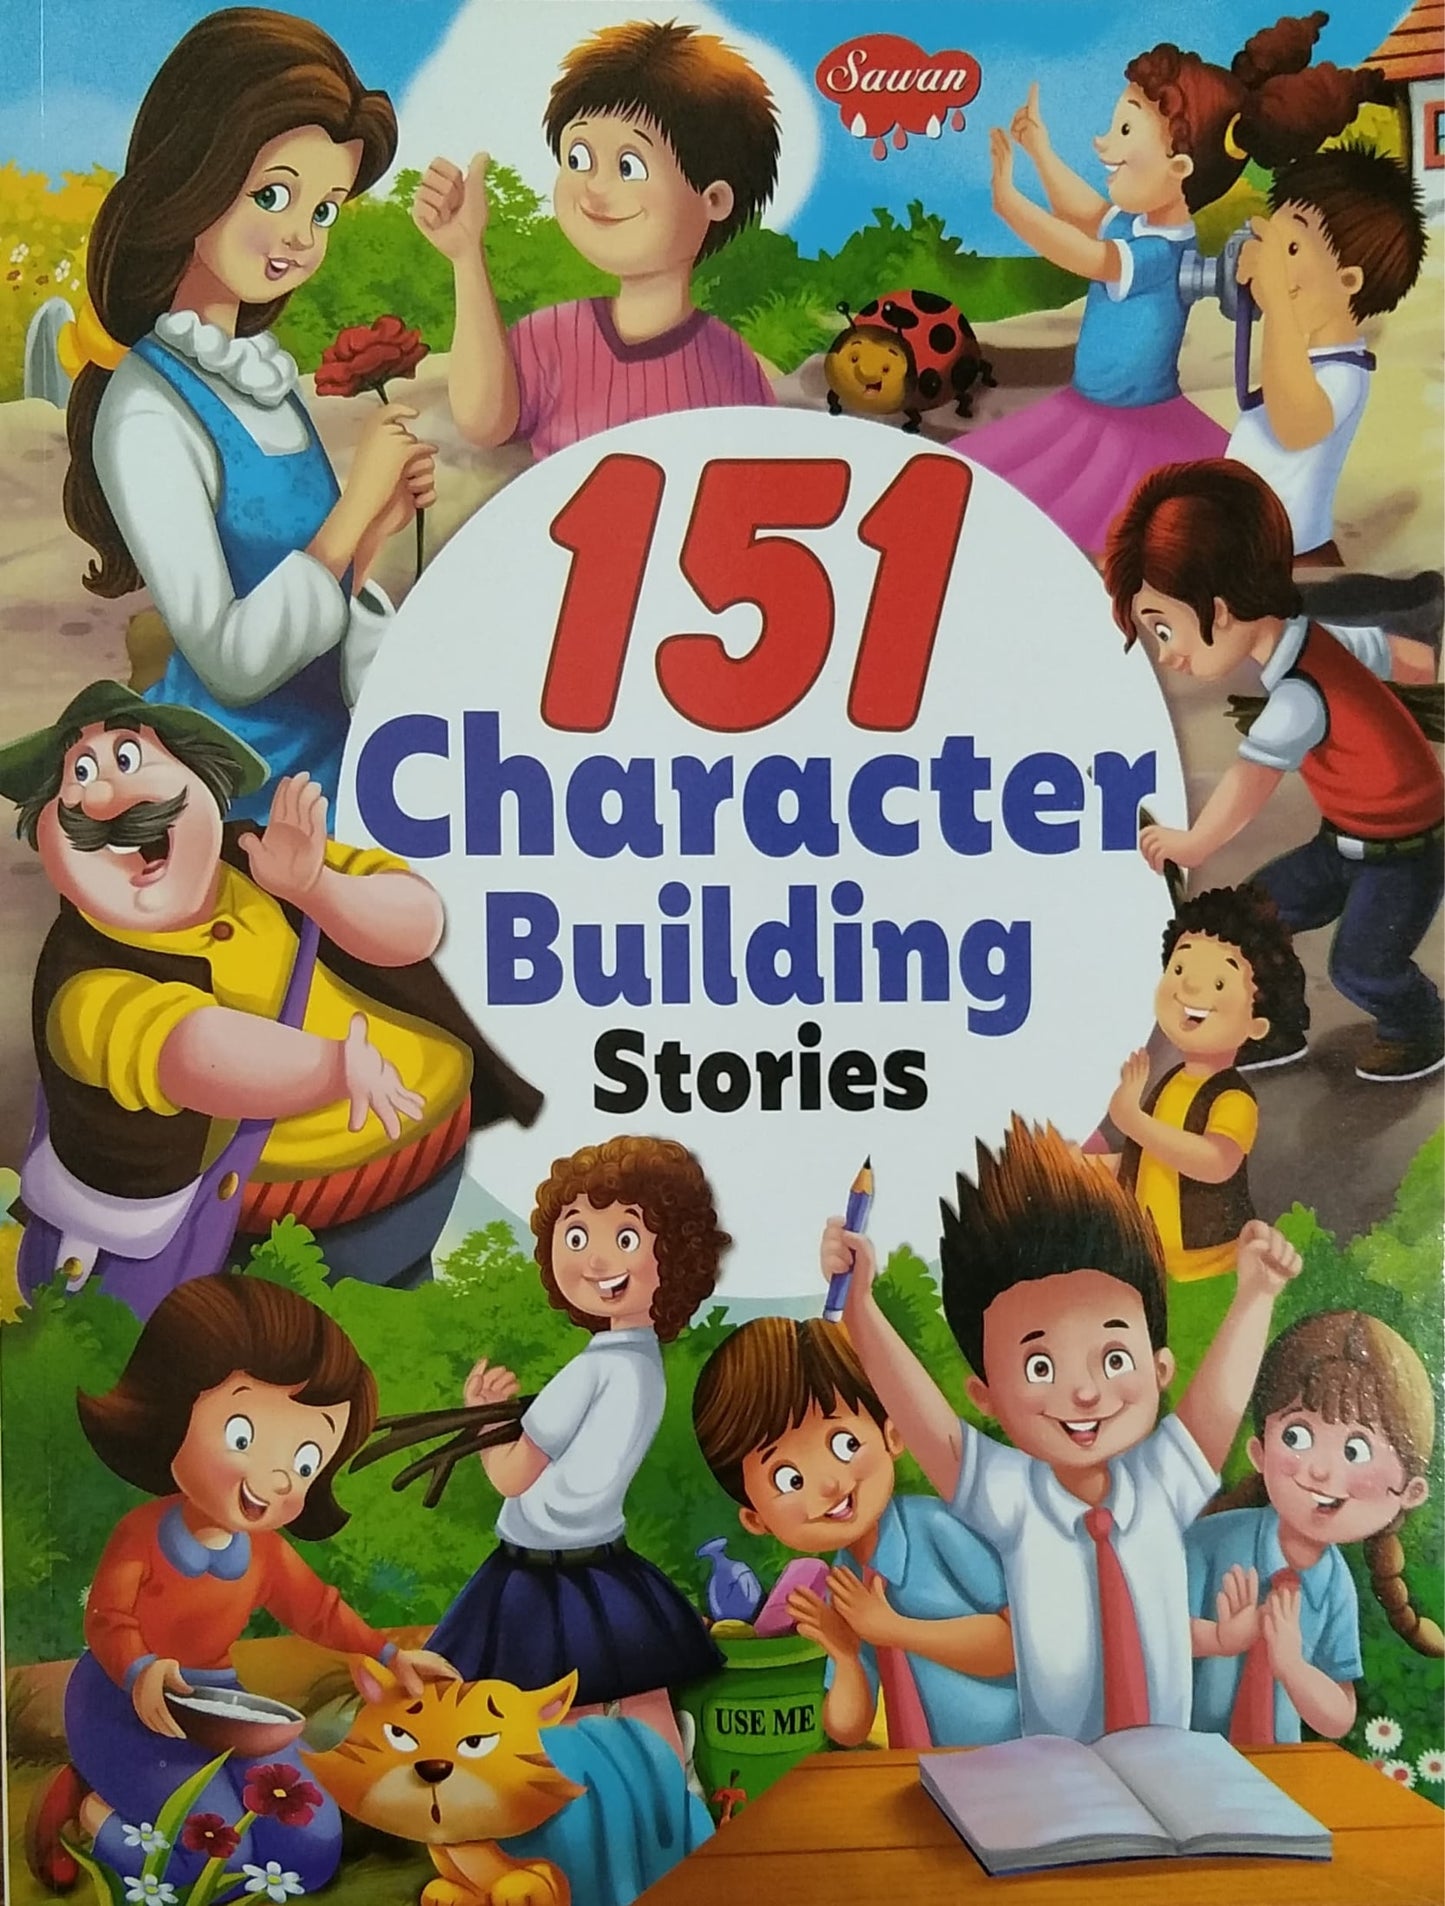 151 Character Building Stories